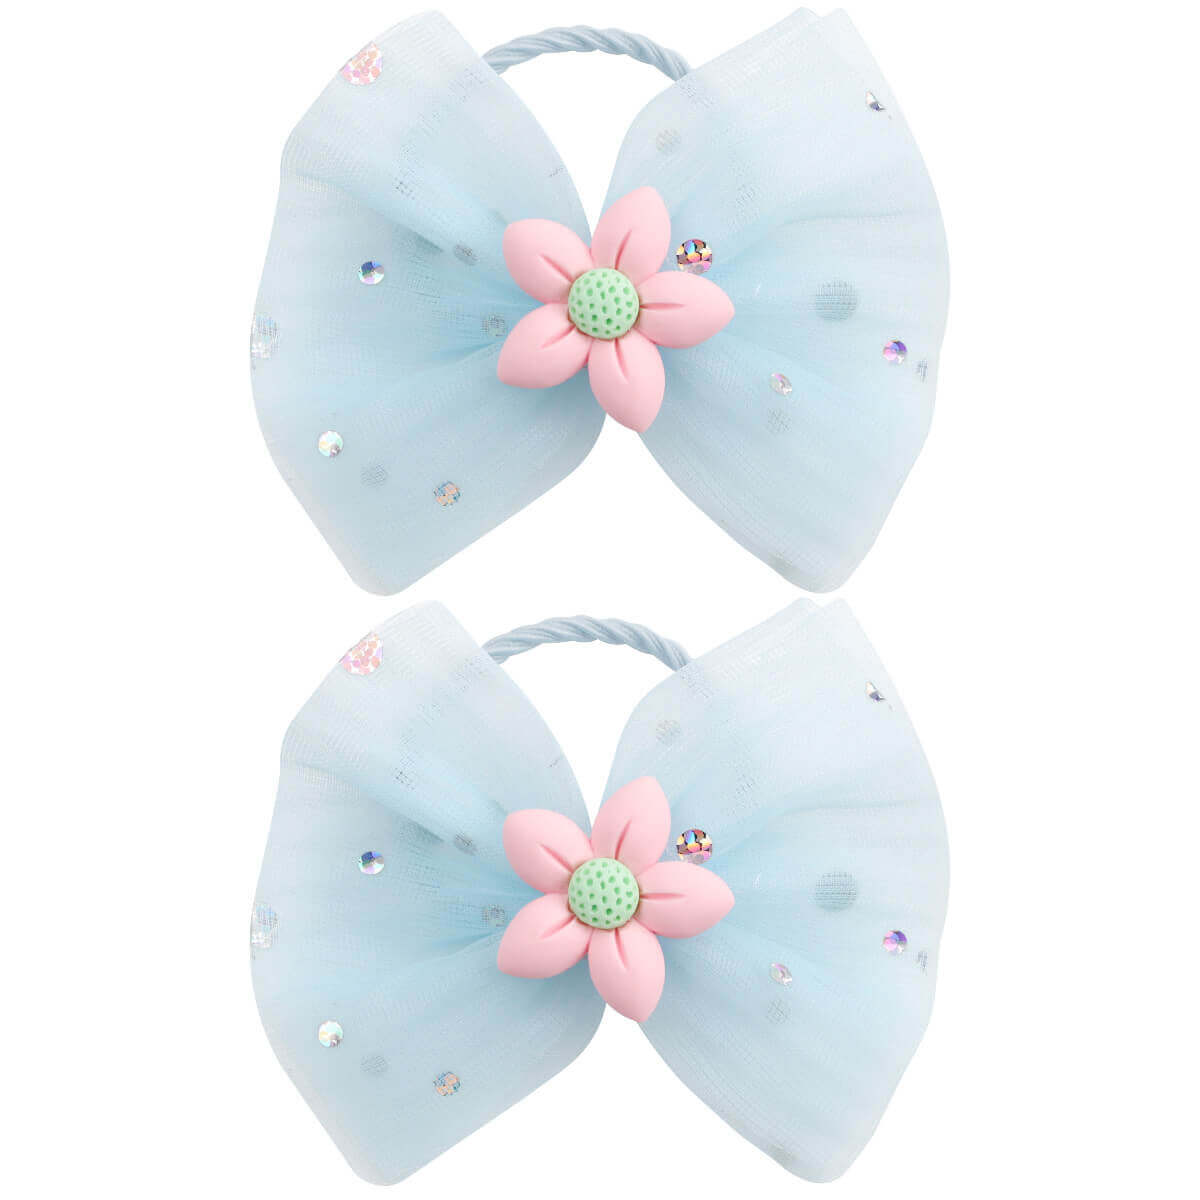 2PCS Cute Tulle Hair Bows for girls